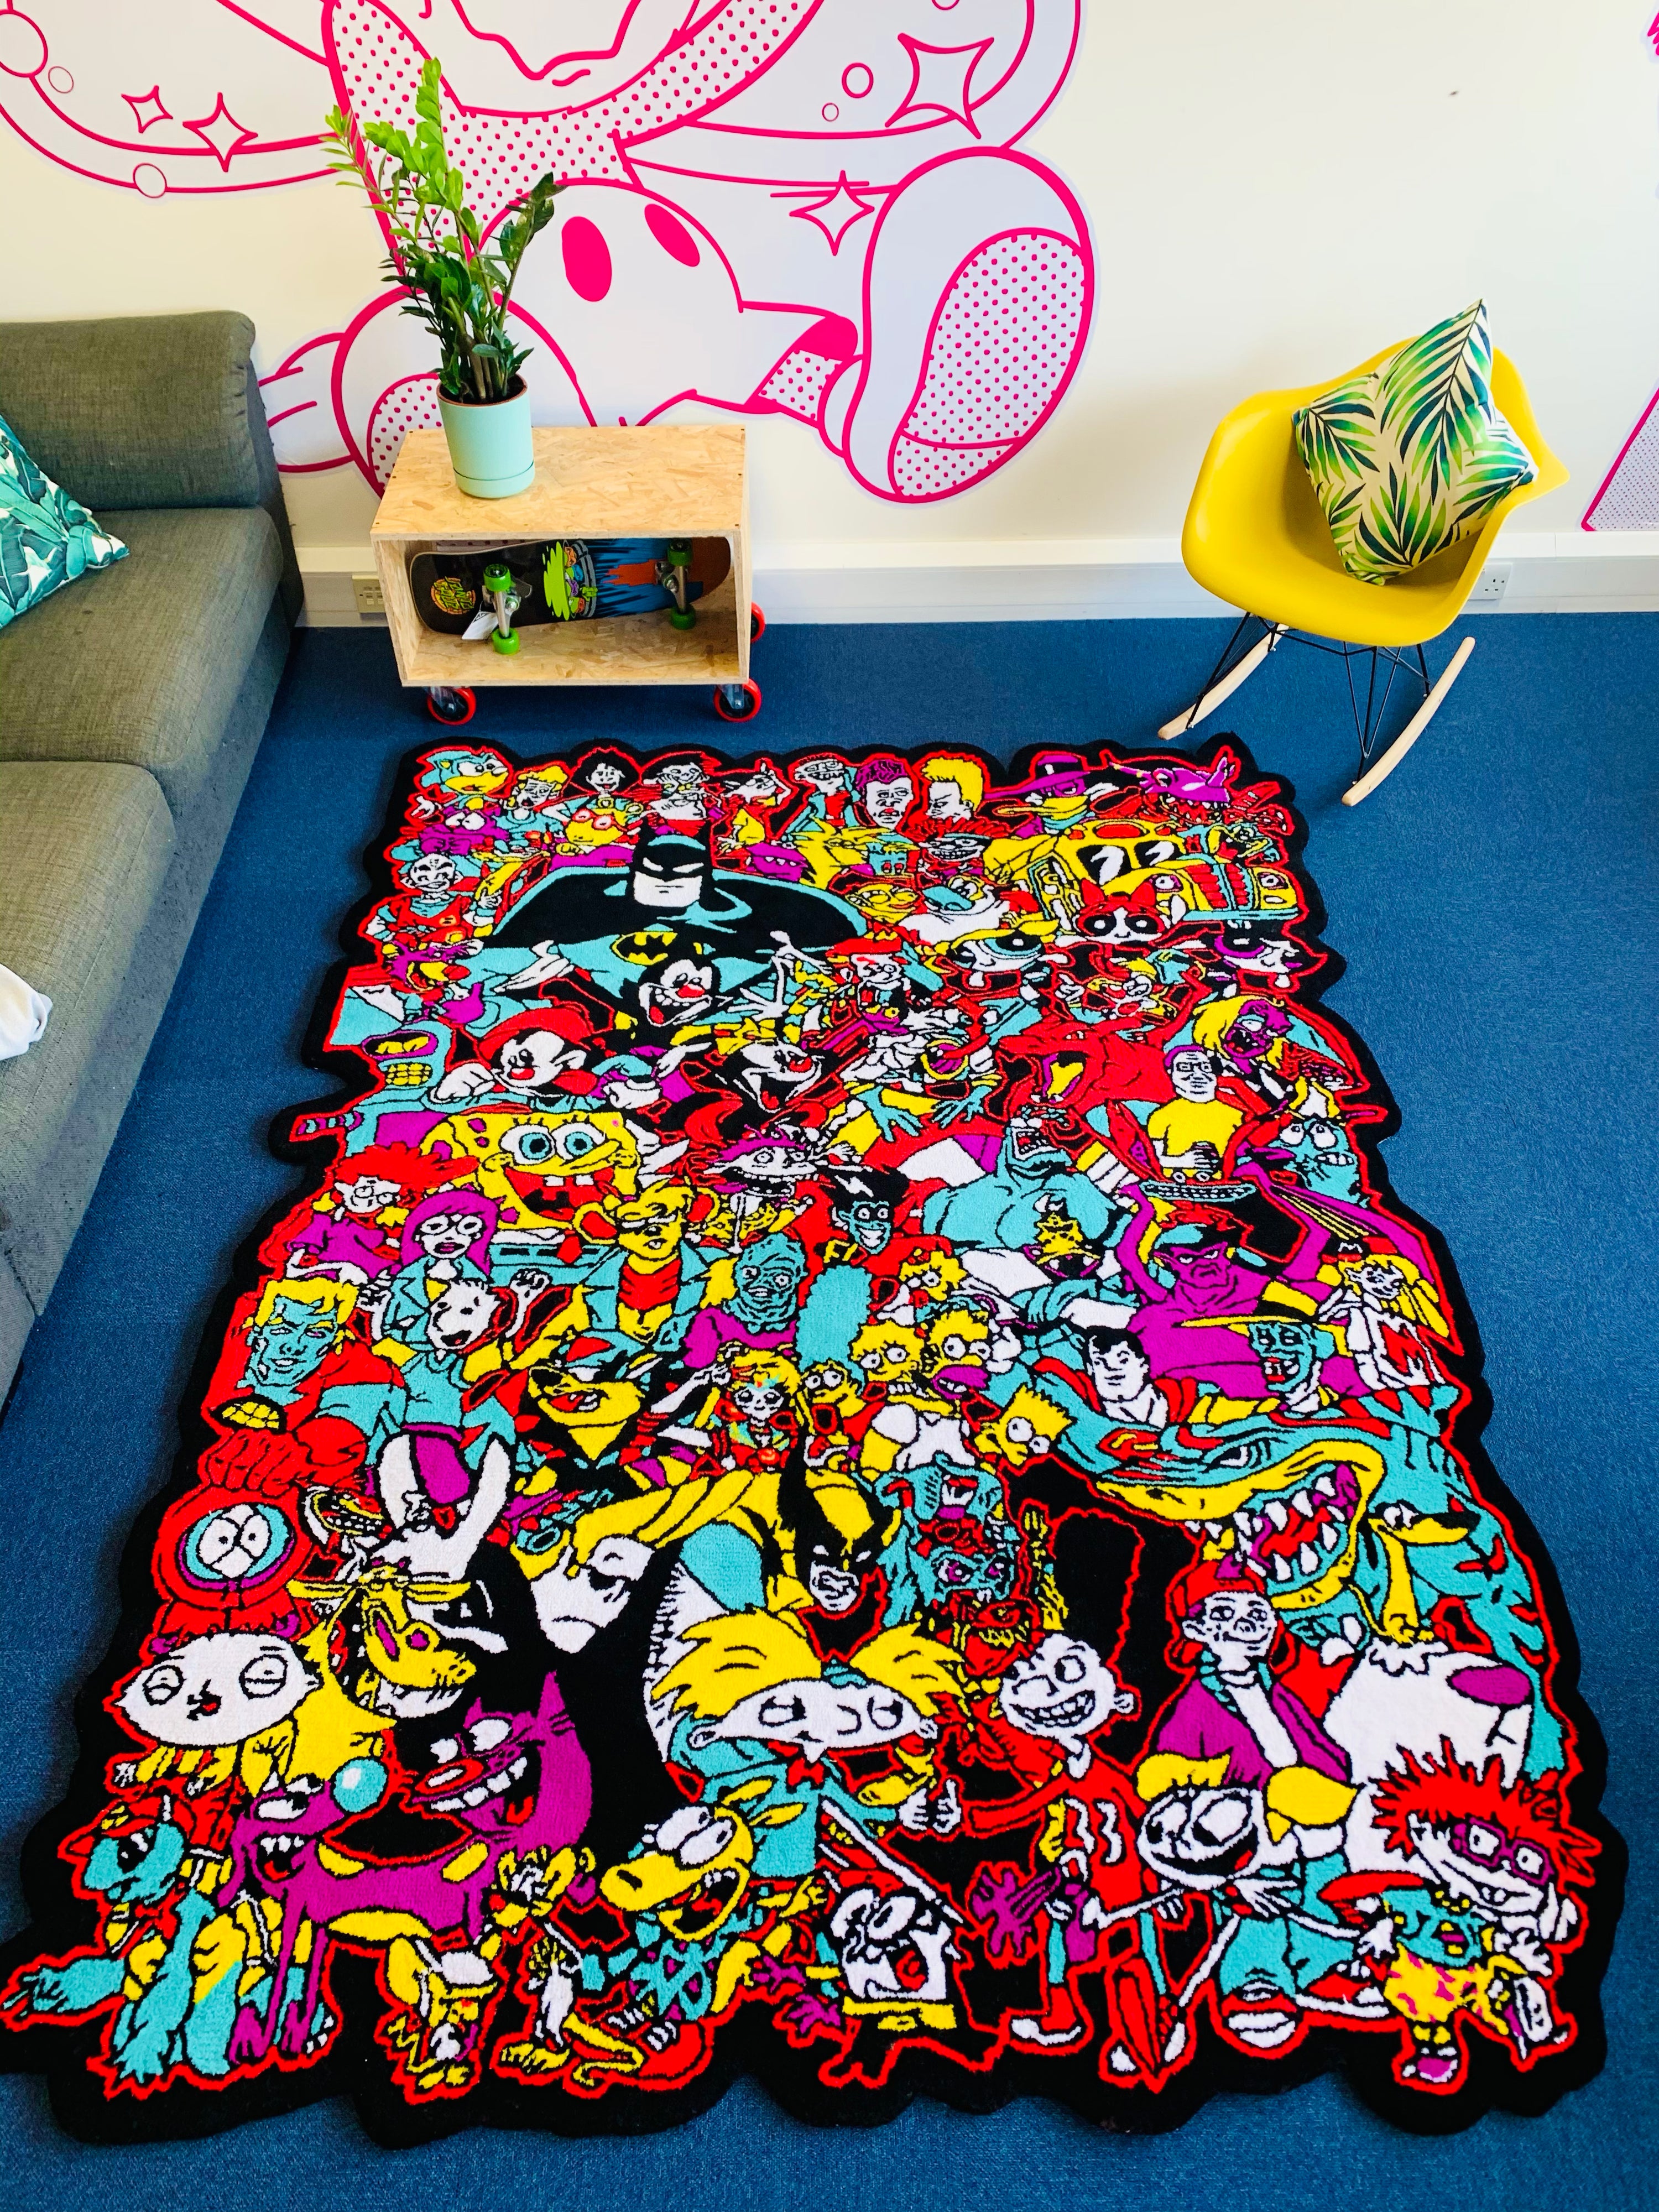 Made in the 90s Limited Edition Handmade Rug